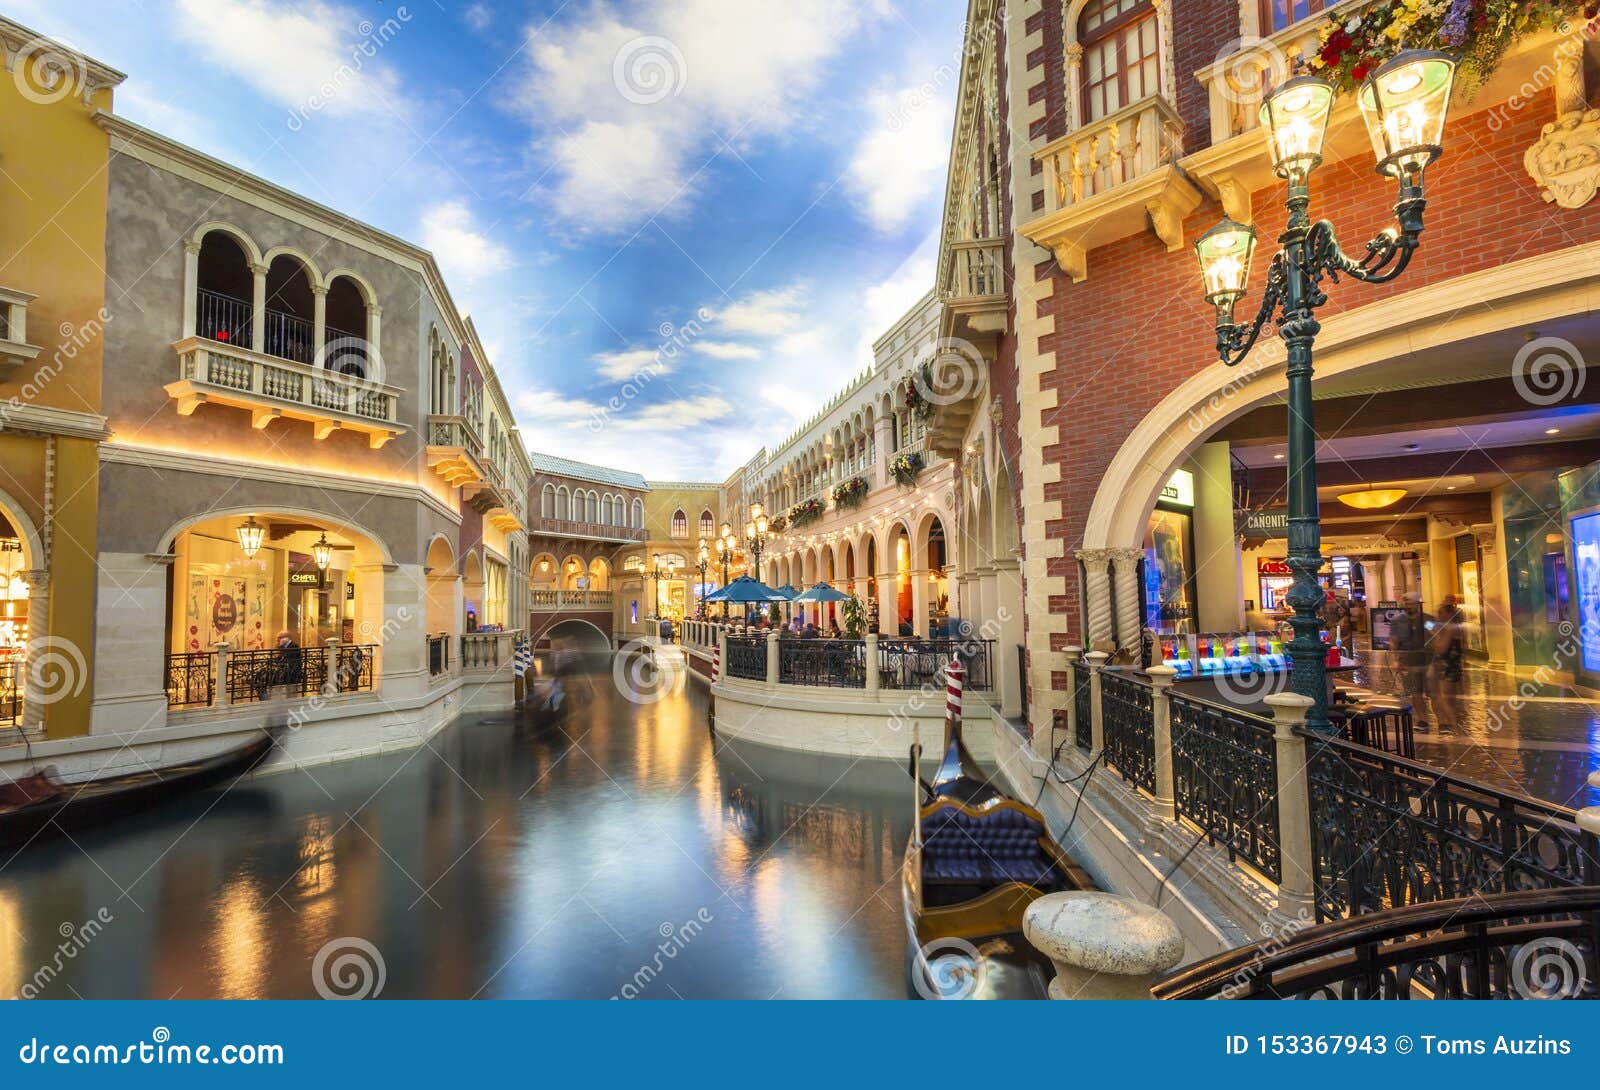 Grand Canal Shoppes in Las Vegas, NV